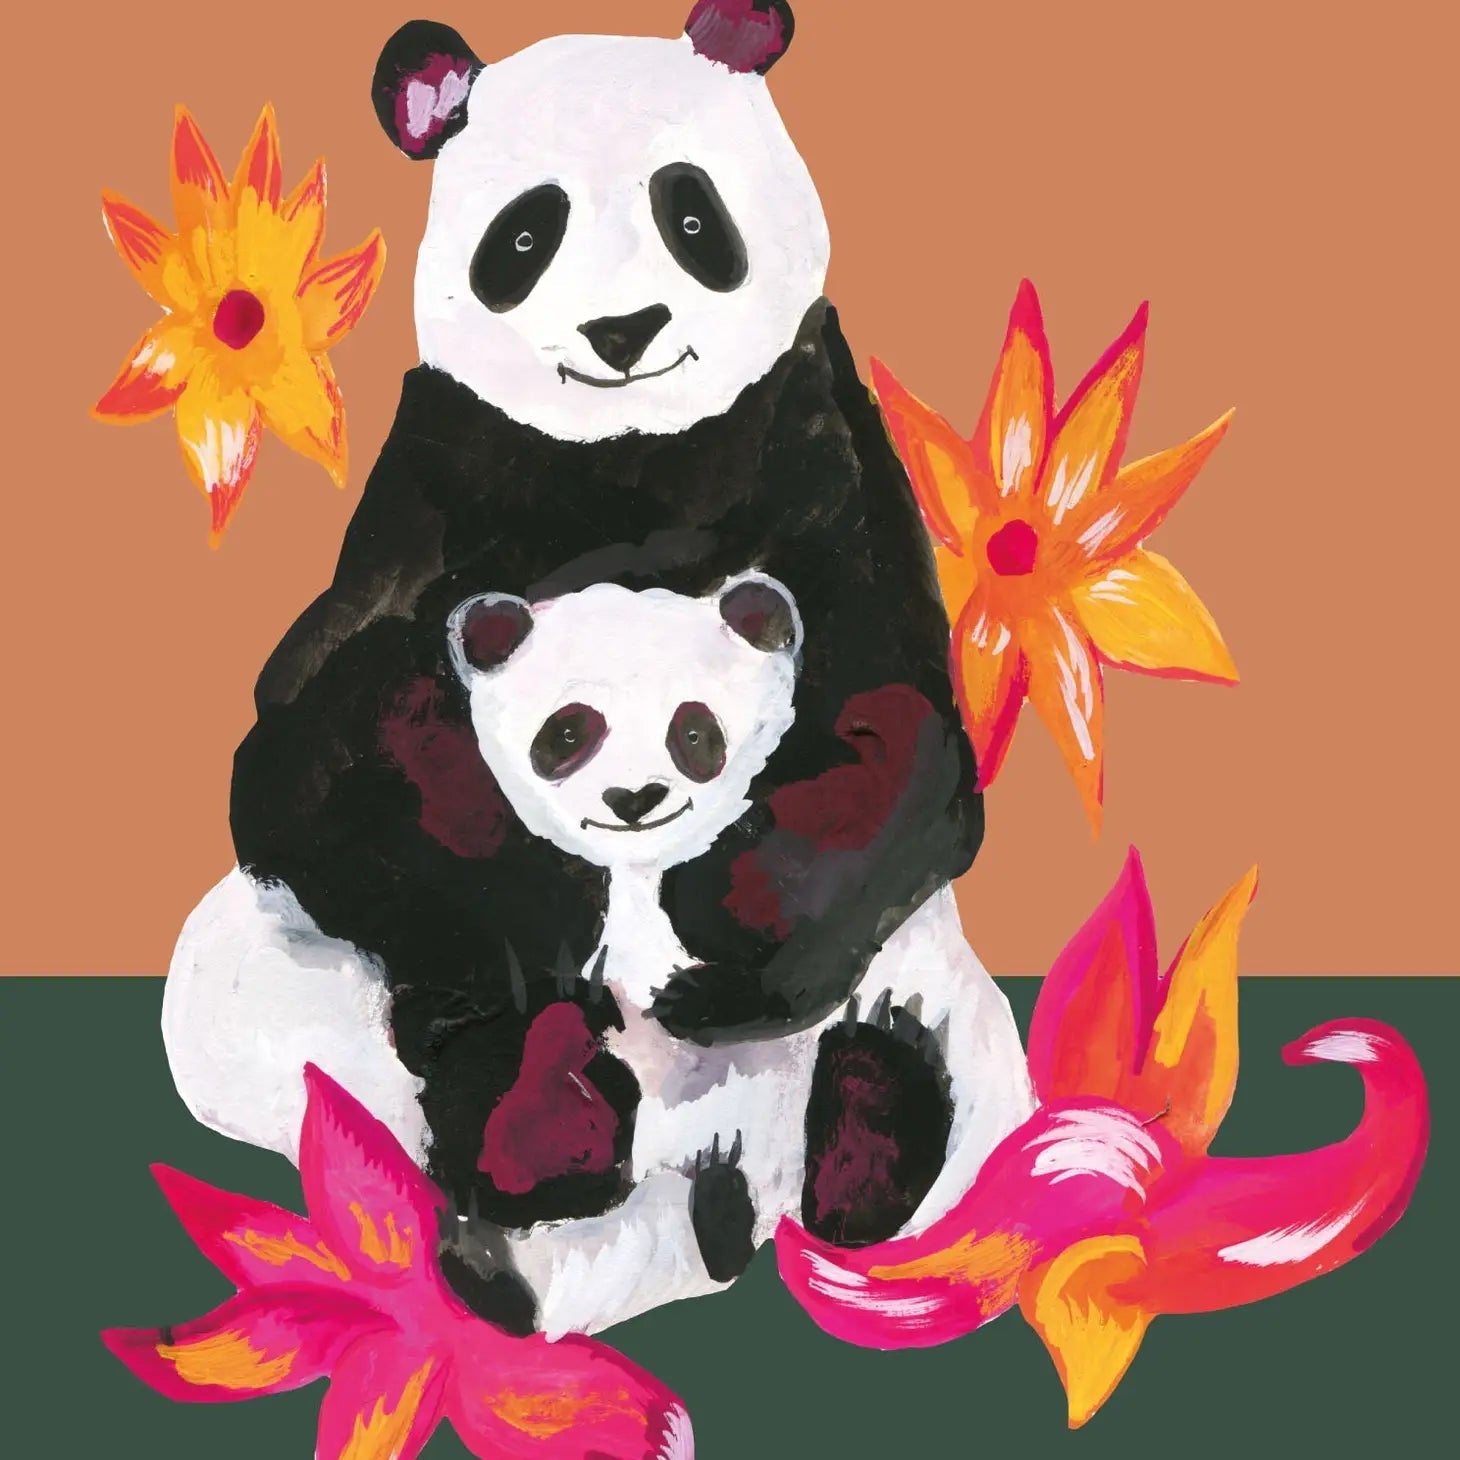 Panda and cub Greeting Card - HCWB360 - The Hare and the Moon